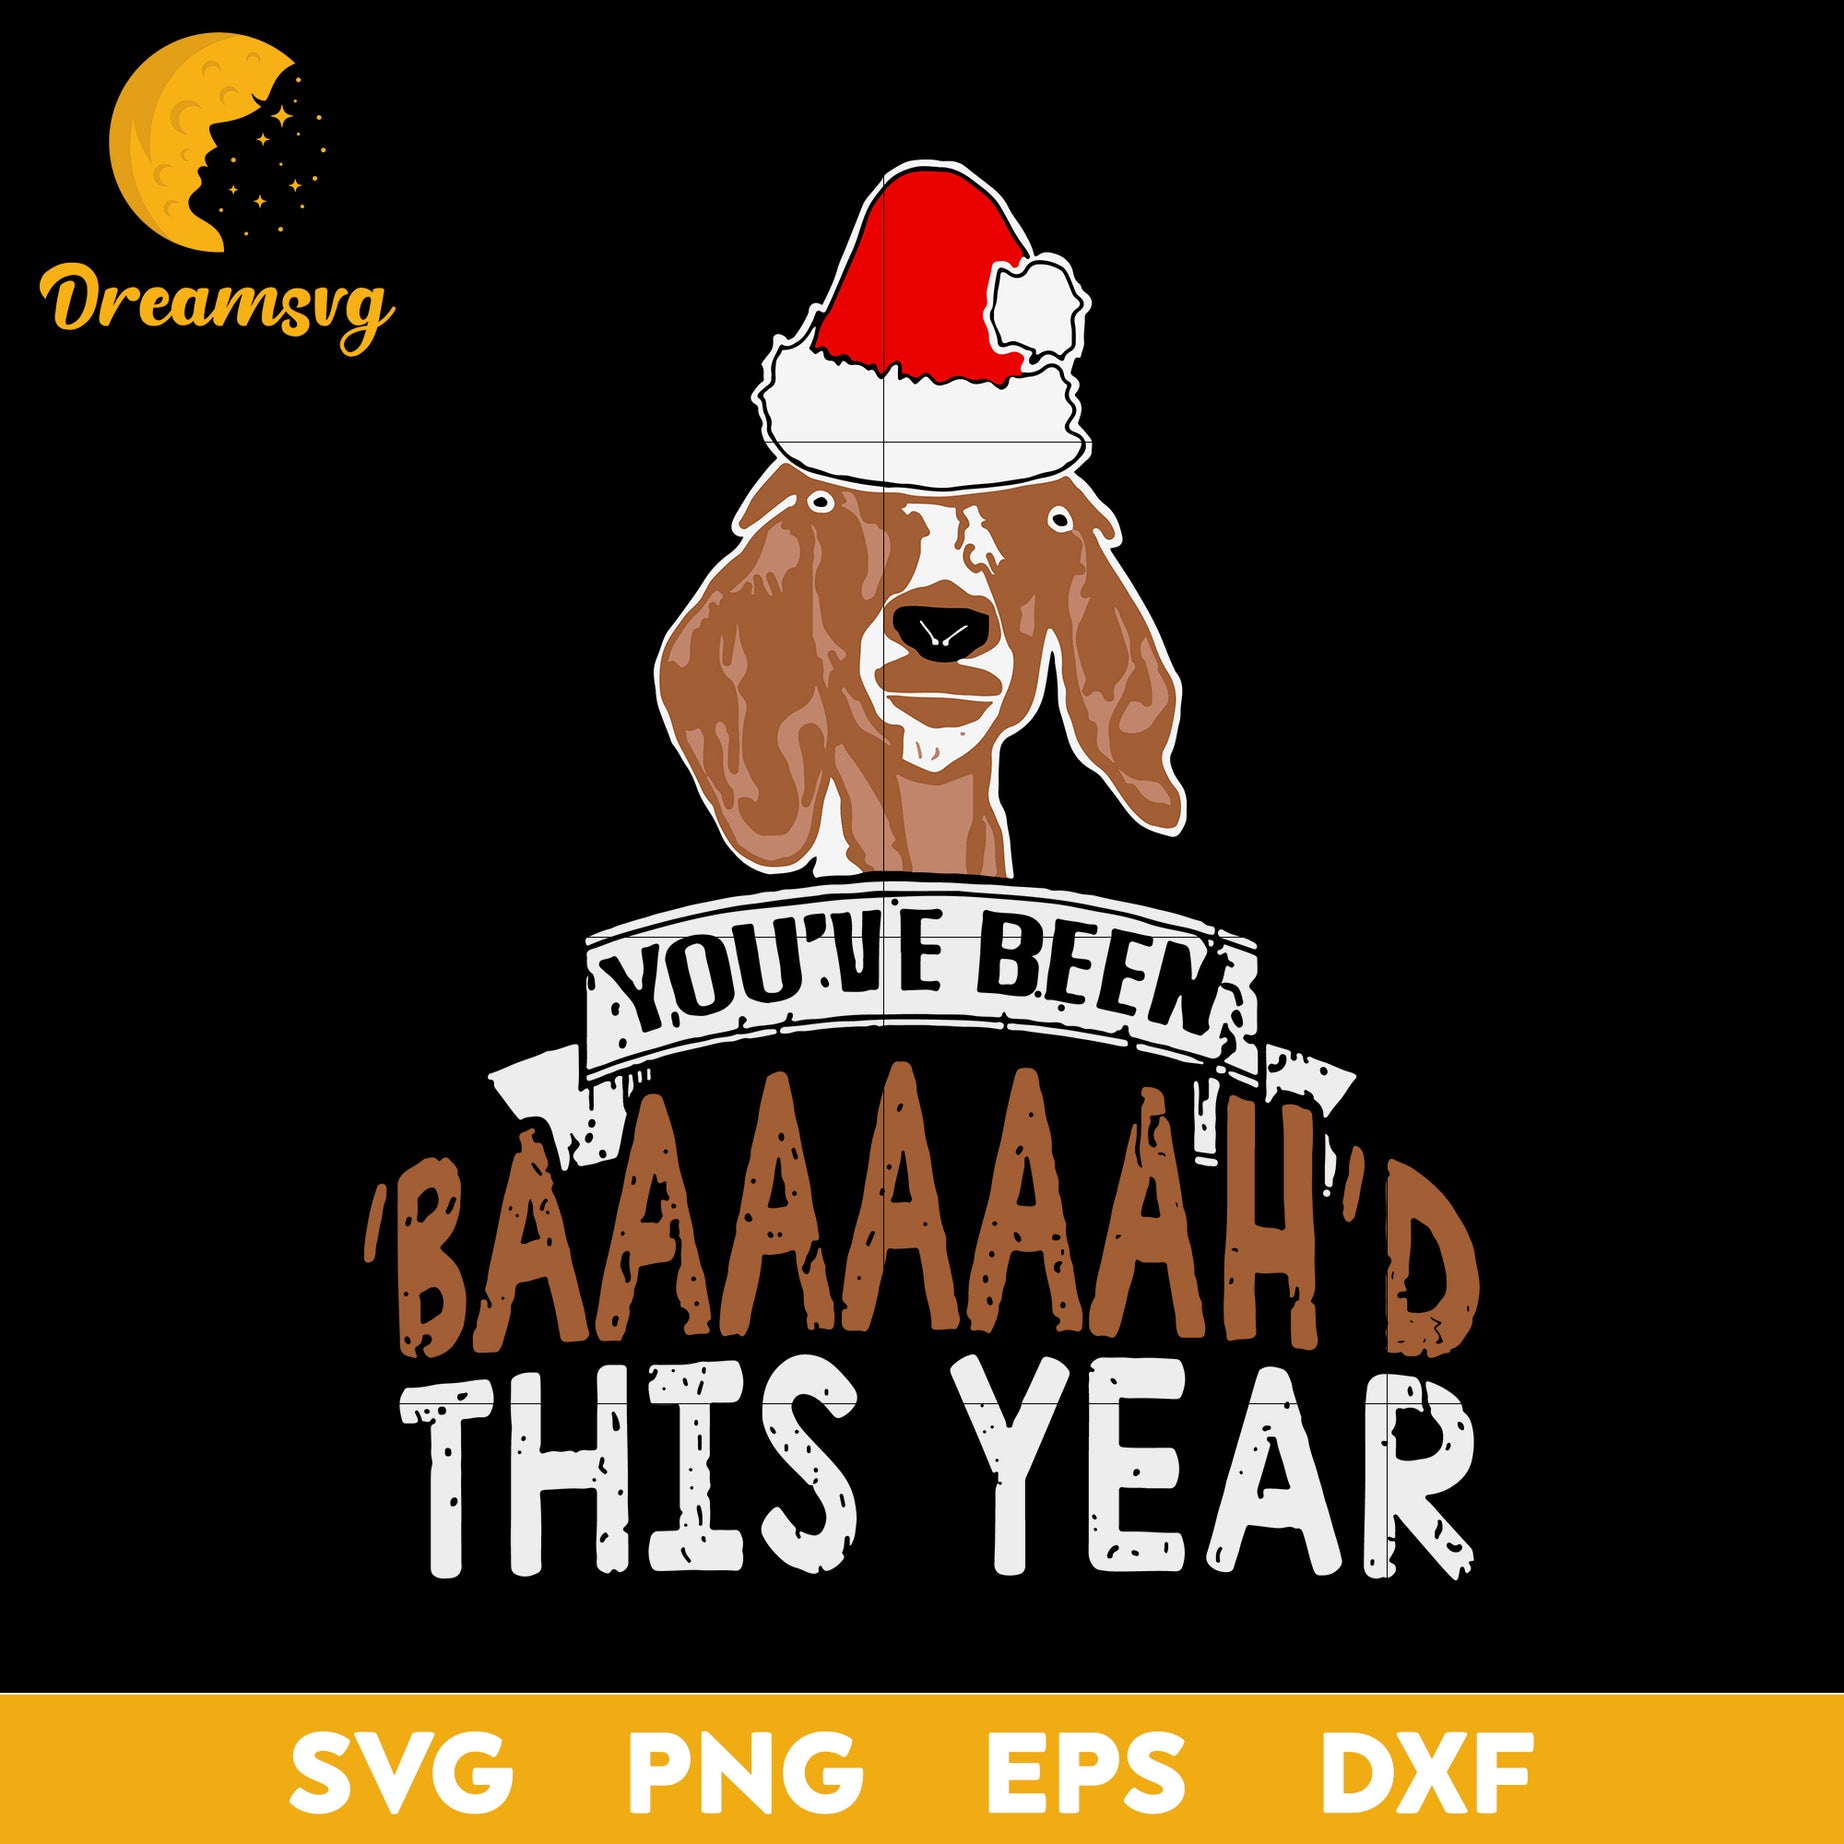 You've Been Baaaaaah'd This Year Svg, Funny Svg, Png, Dxf, Eps Digital File.